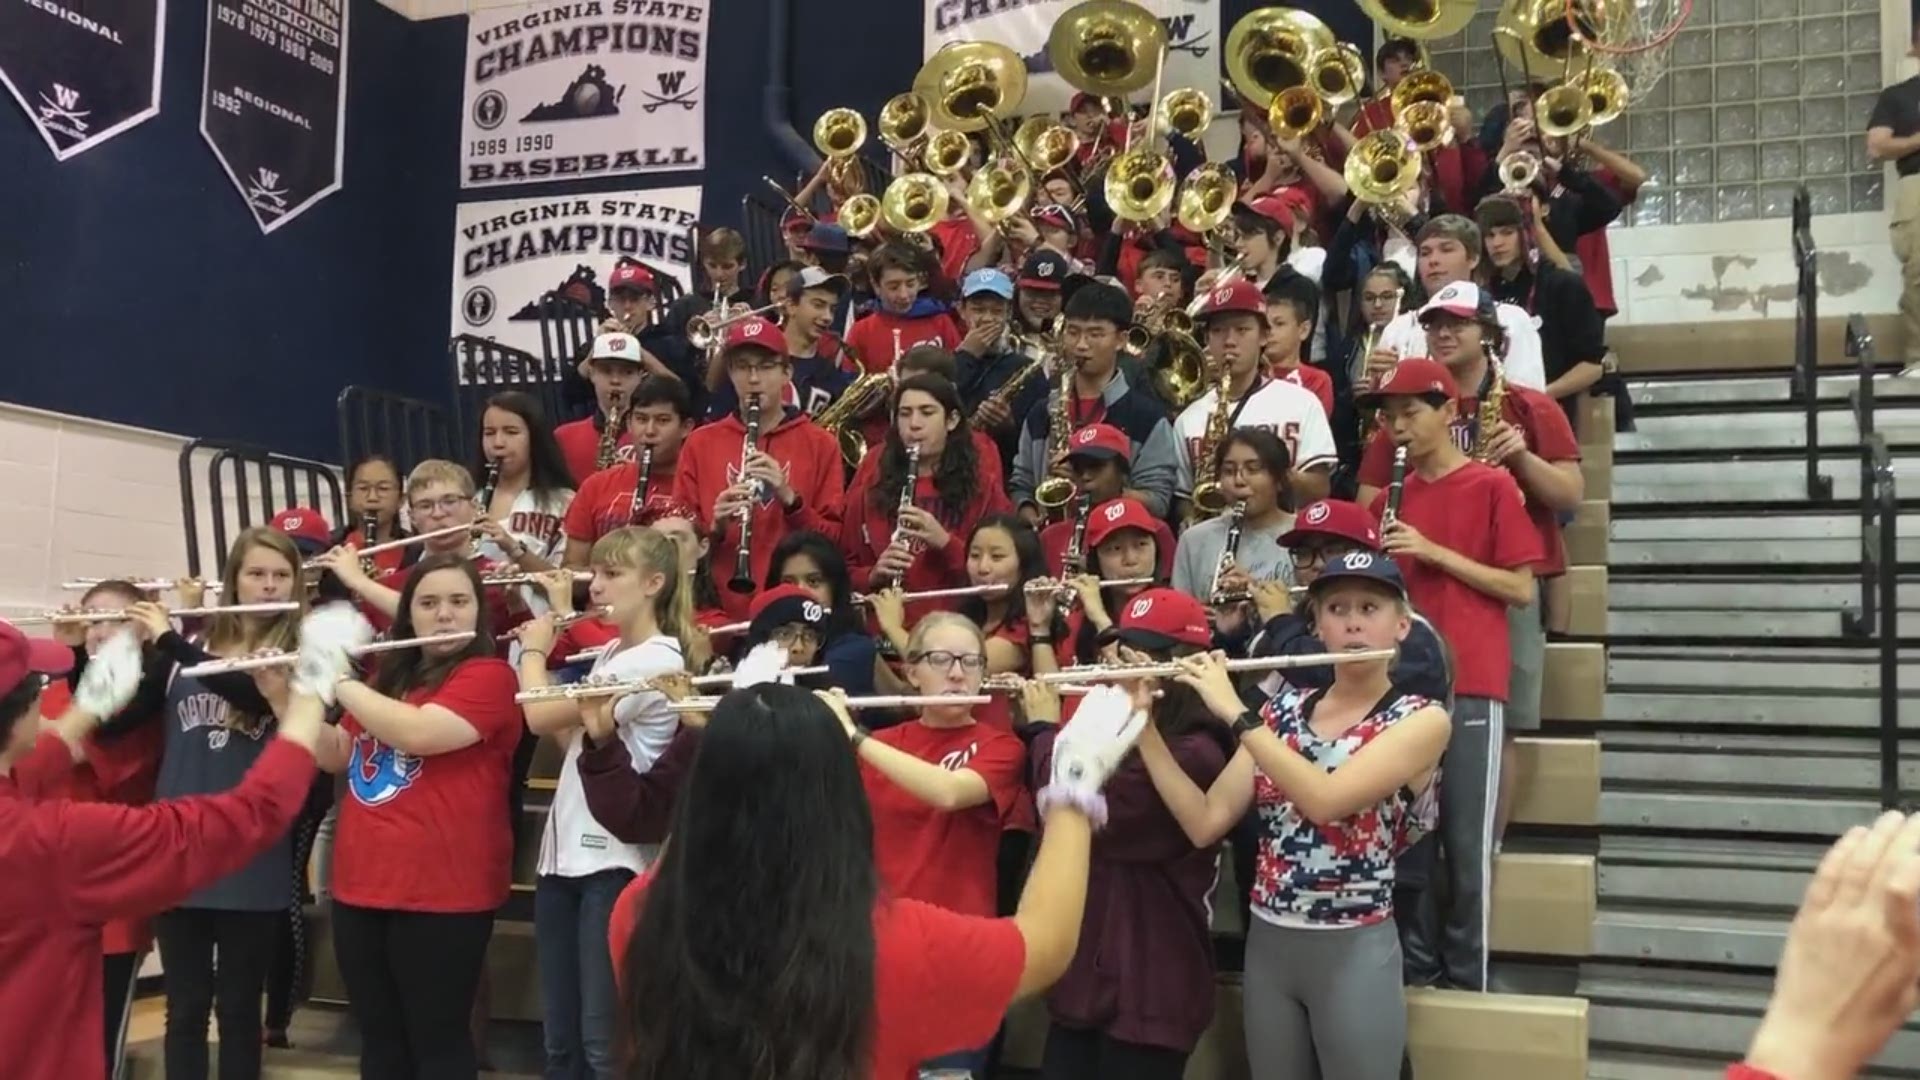 The Fairfax County school celebrated the Washington Nationals by coming up with their own unique twist on the popular "Baby Shark" song